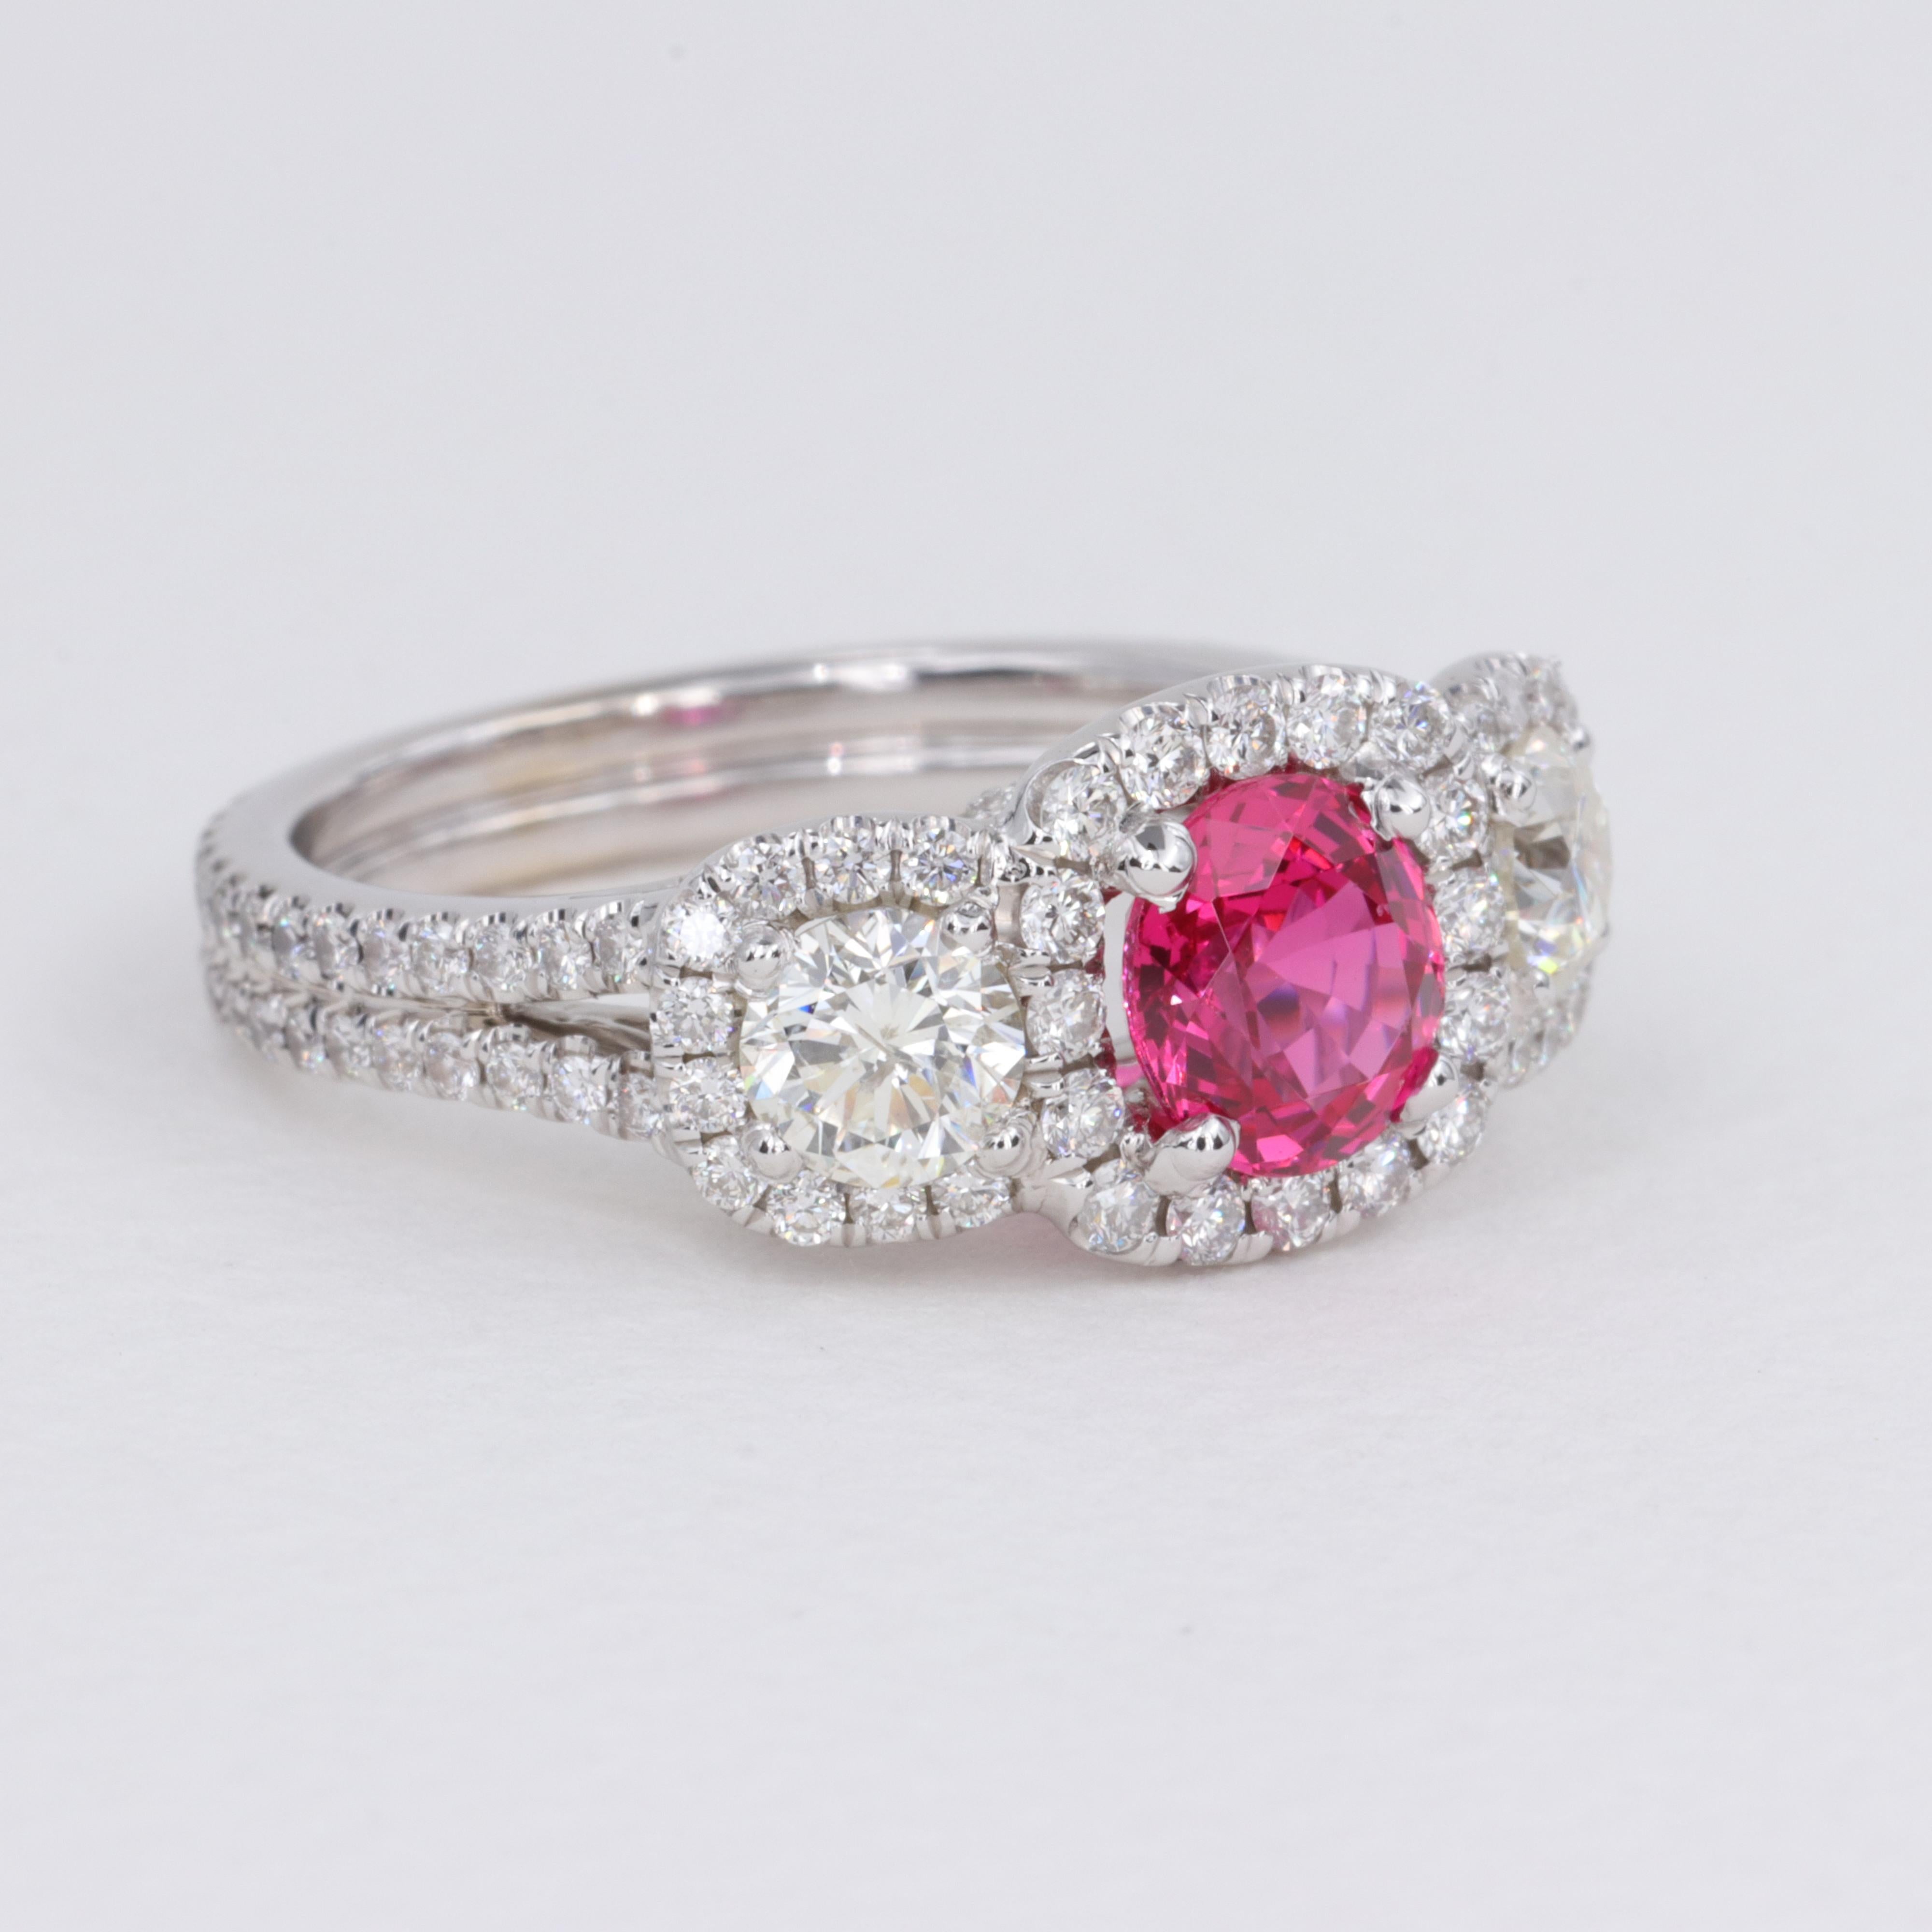 1.44 Carat Pink Spinel G.I.A. and Diamond Three Stone Halo Ring  In Excellent Condition For Sale In Tampa, FL